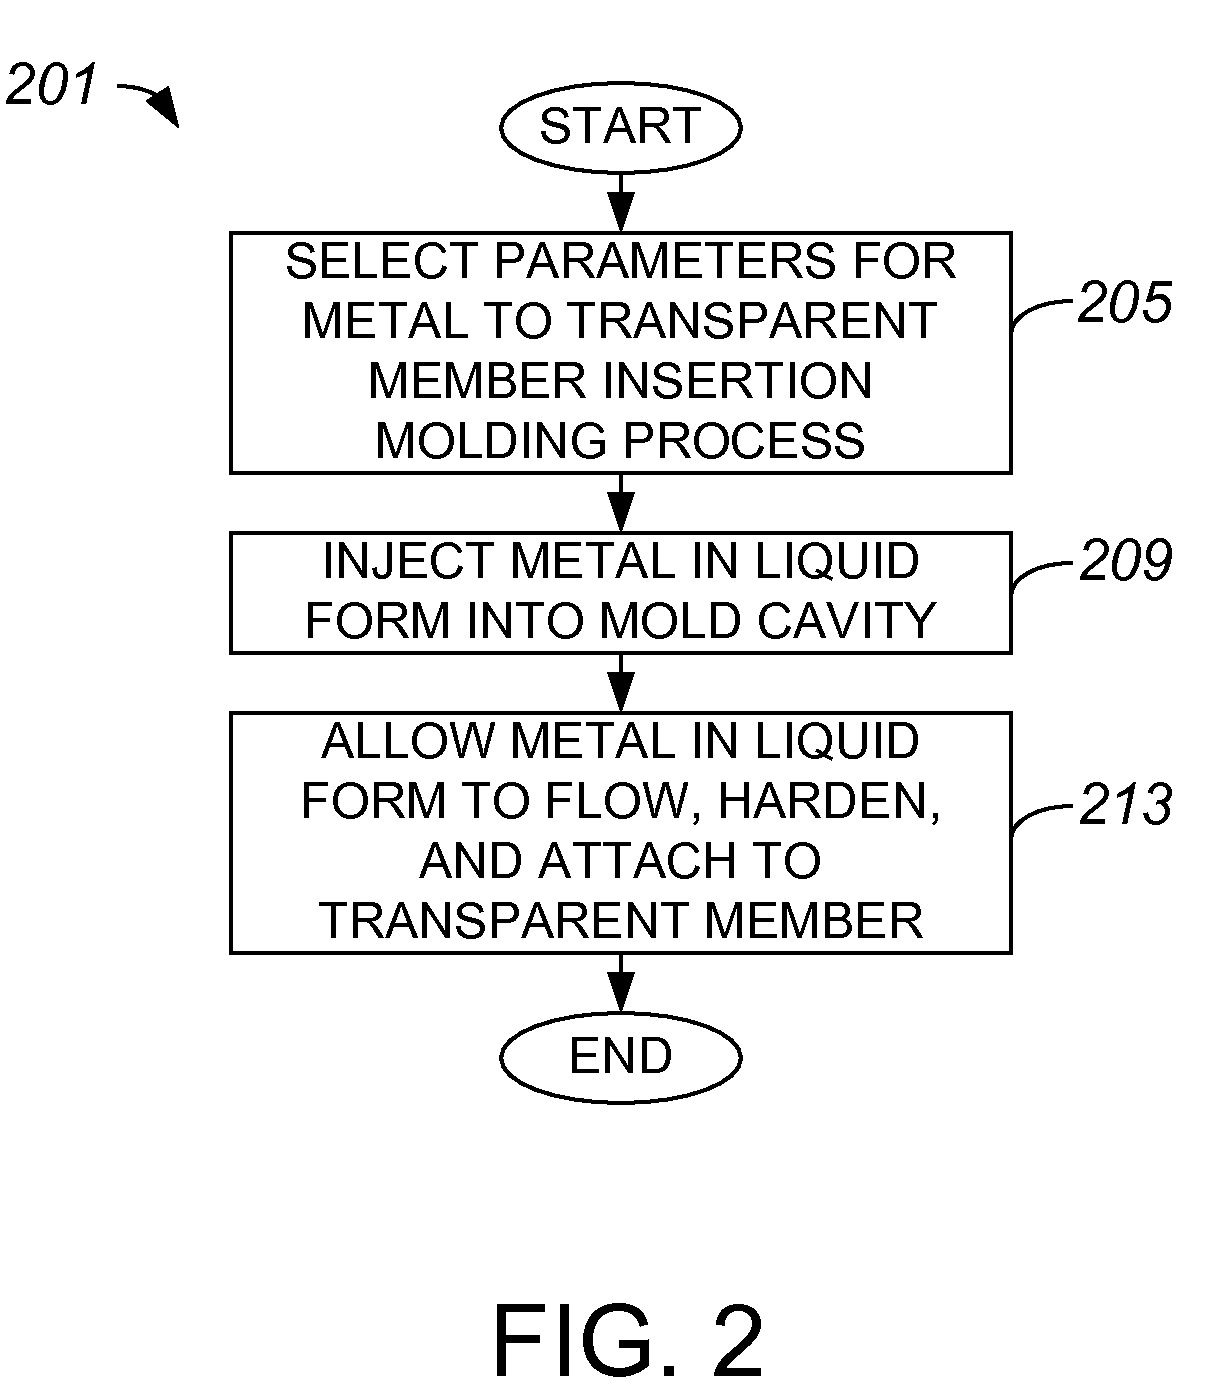 Methods and Systems for Integrally Trapping a Glass Insert in a Metal Bezel